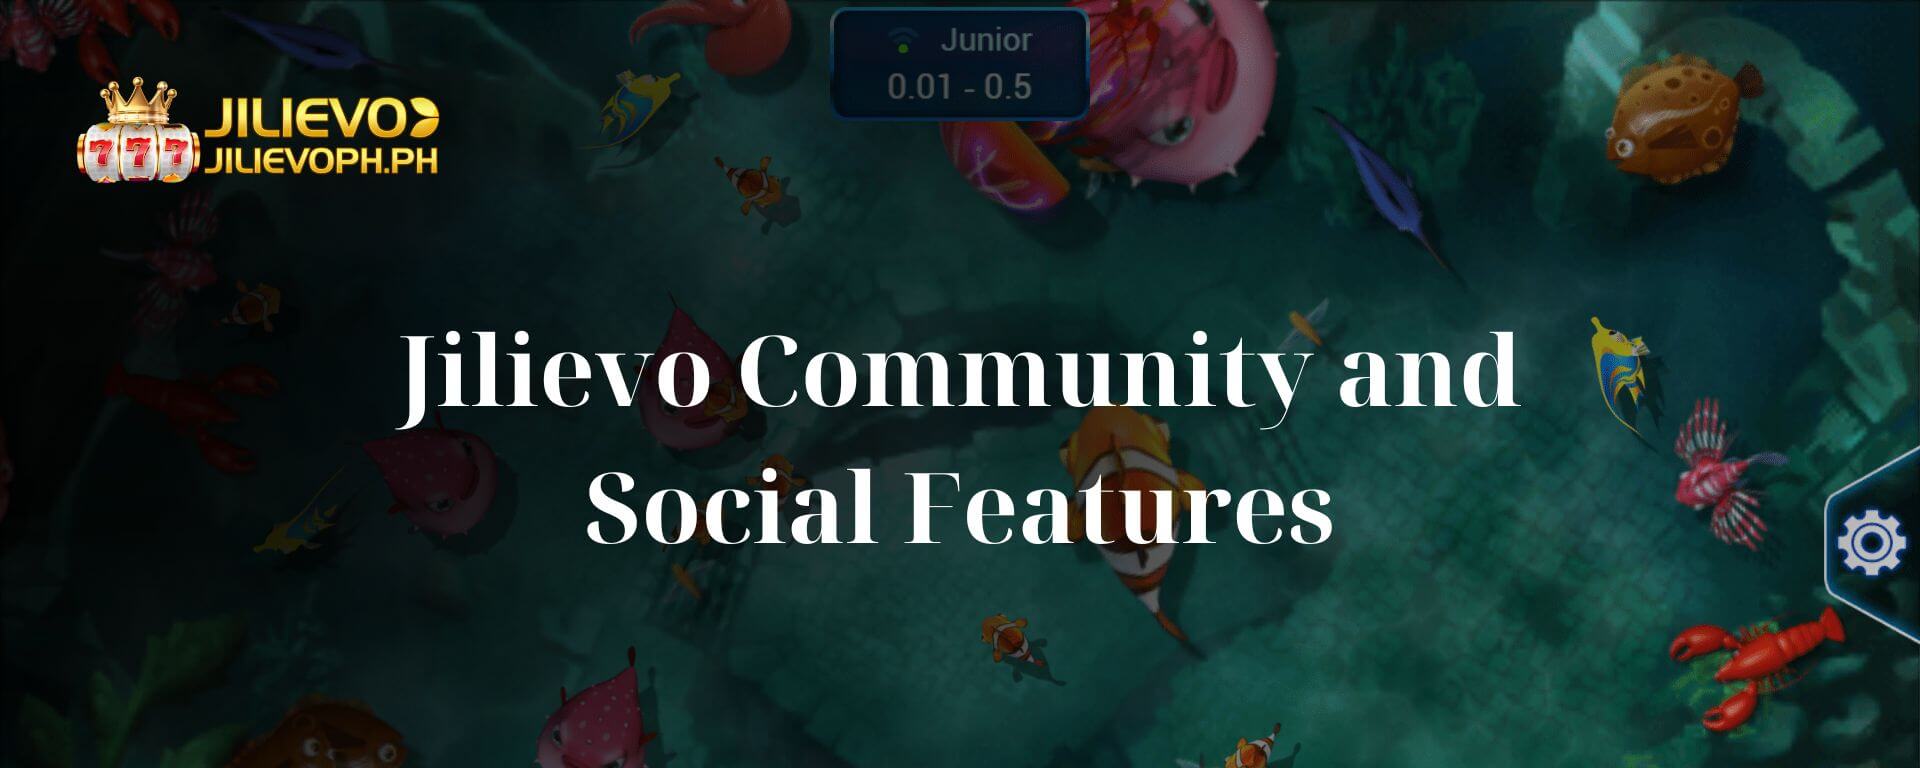 Jilievo Community and Social Features